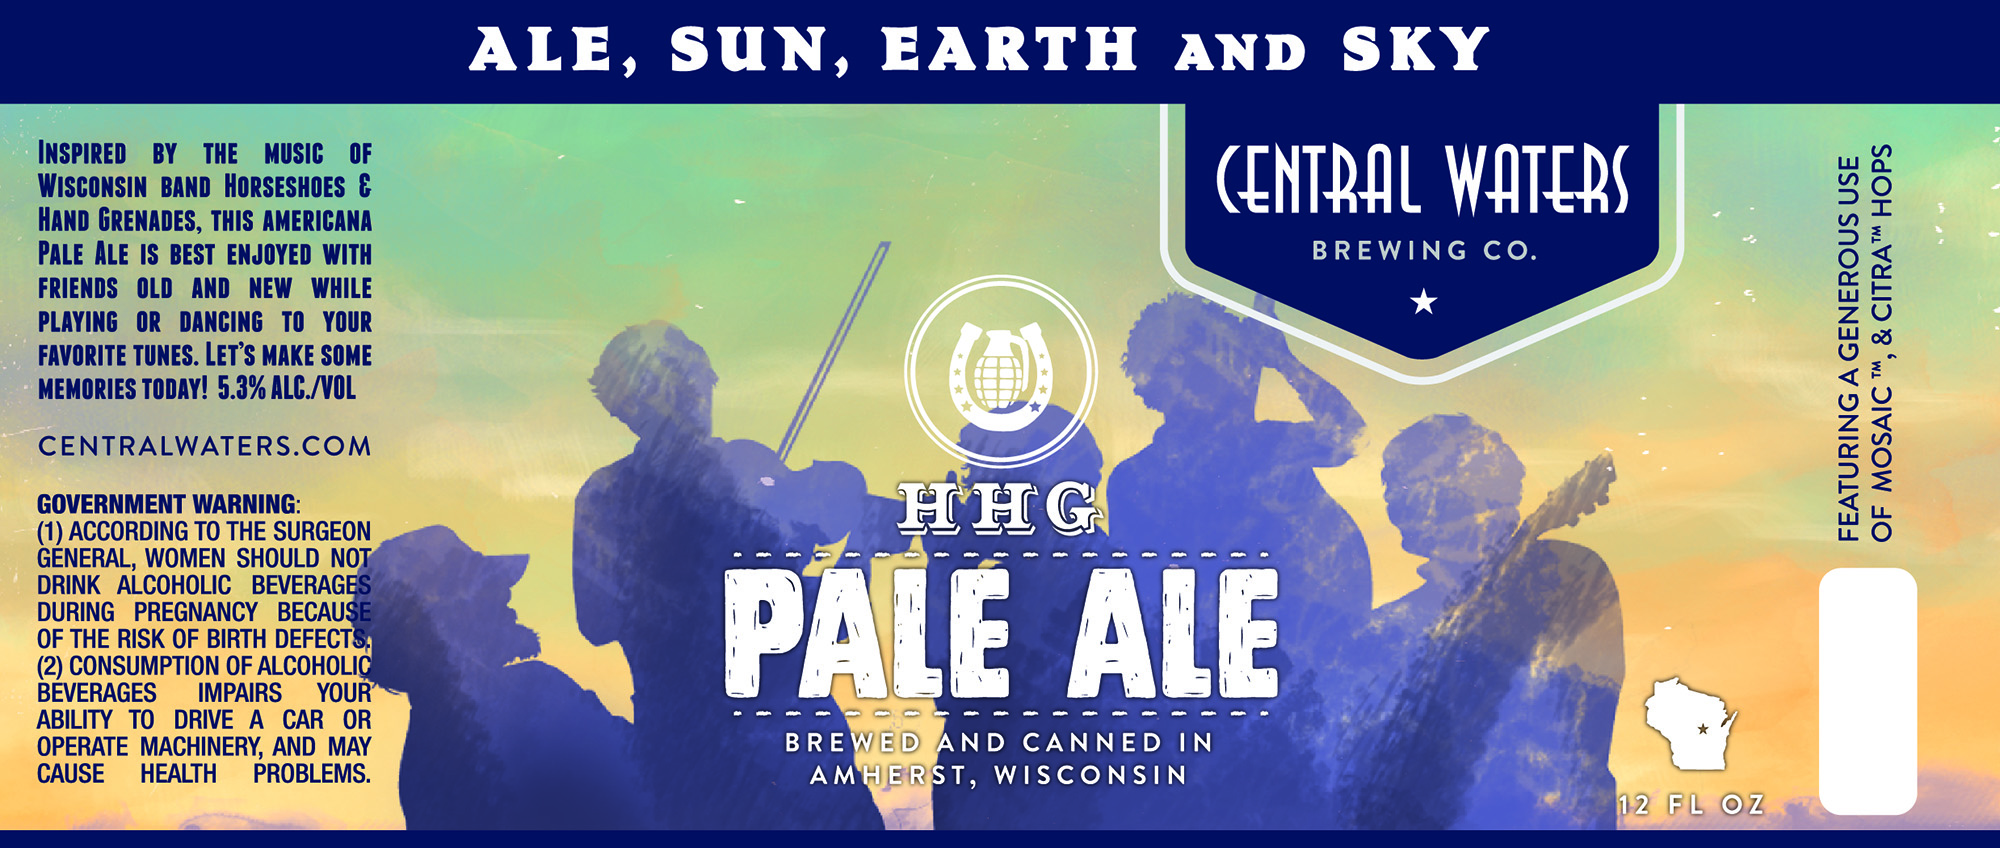 Central Waters Brewing Company's HHG APA